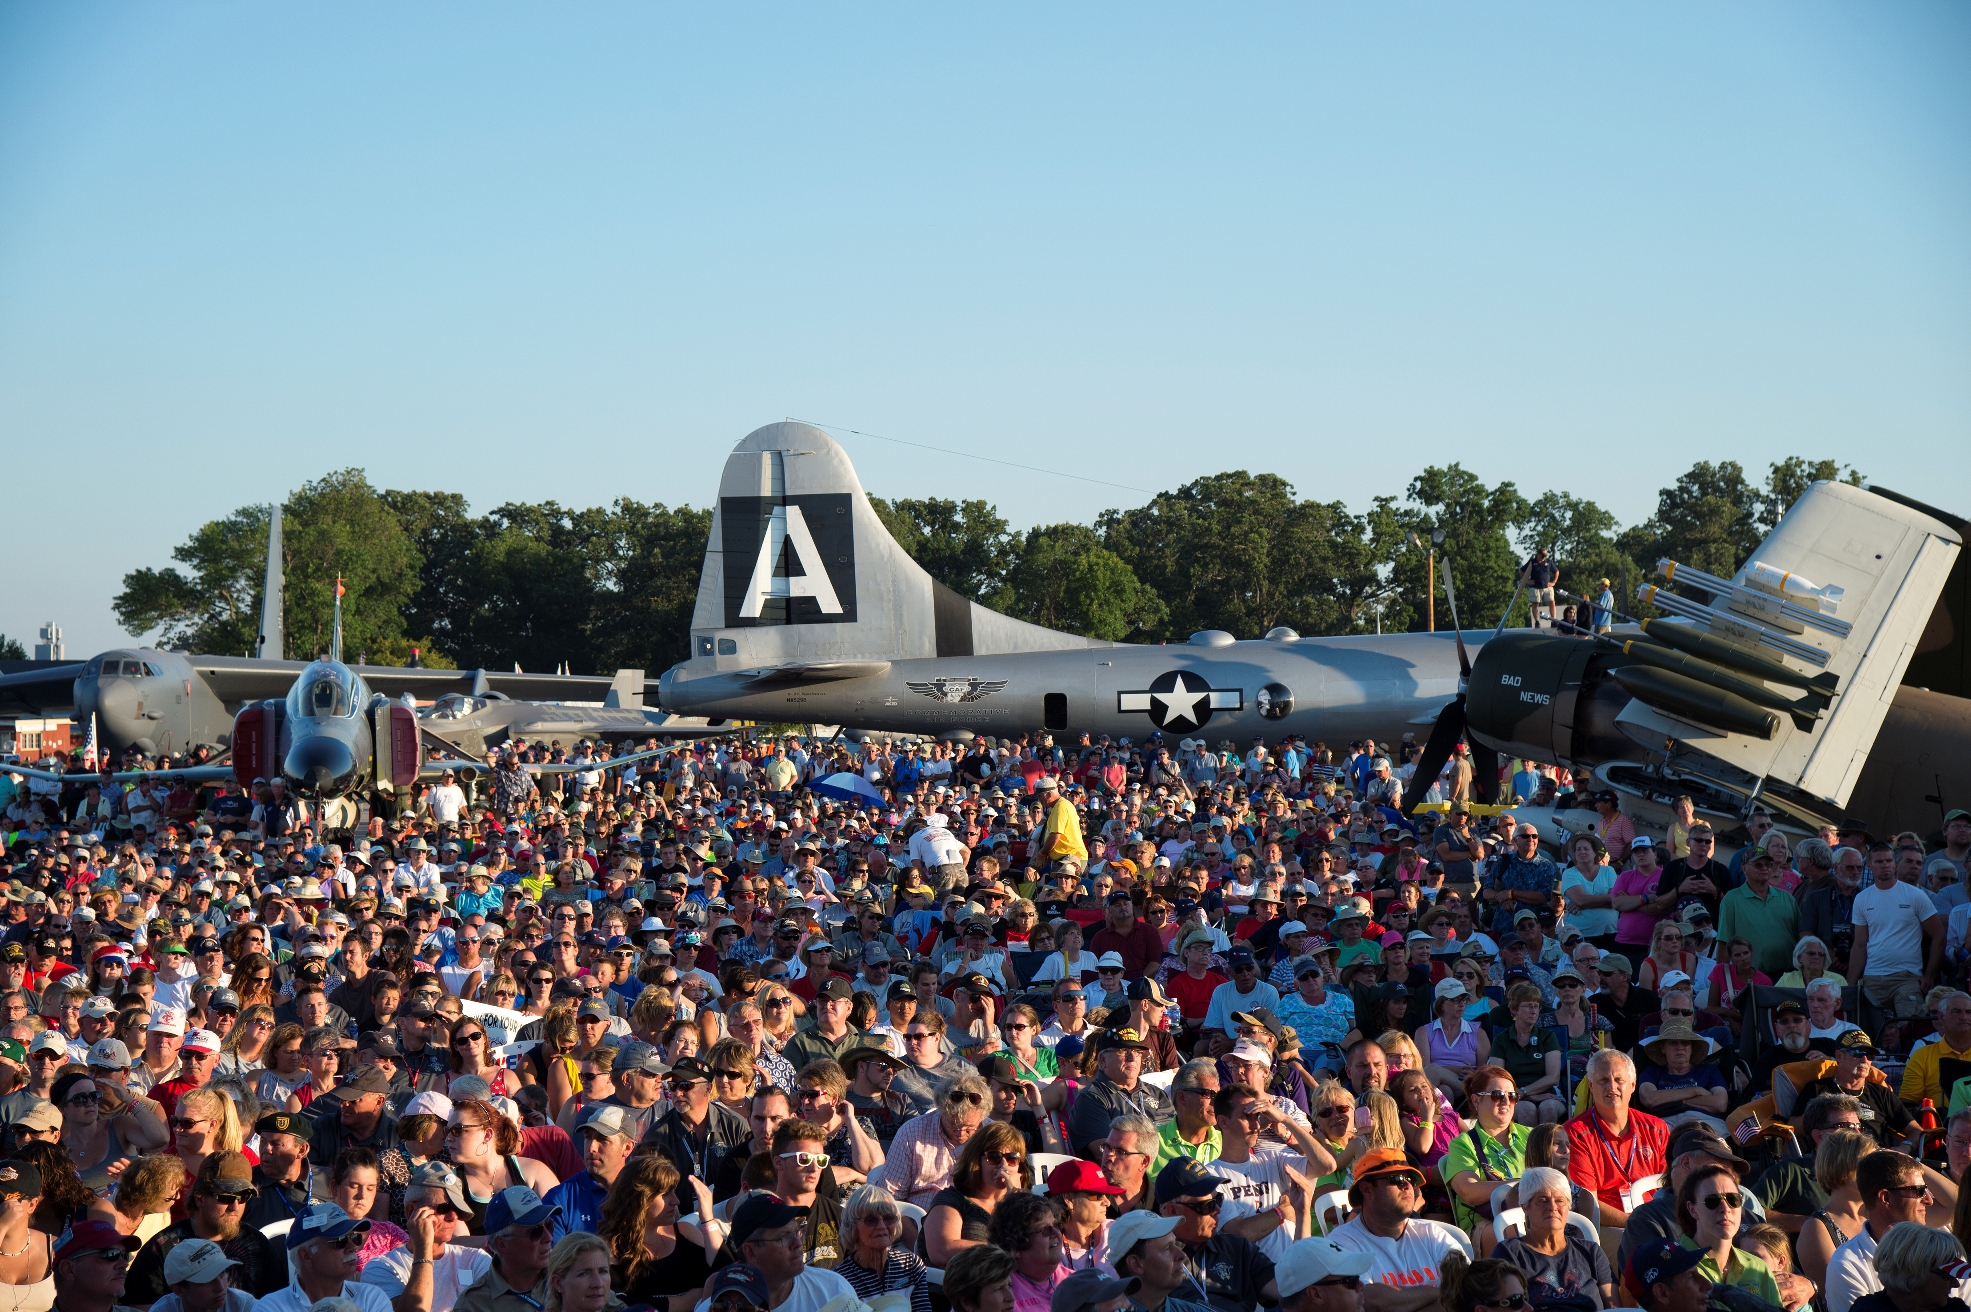 Such iconic airplanes as the B-29 and F-4 are part of the attraction at EAA AirVenture Oshkosh, which draws an annual attendance of 500,000